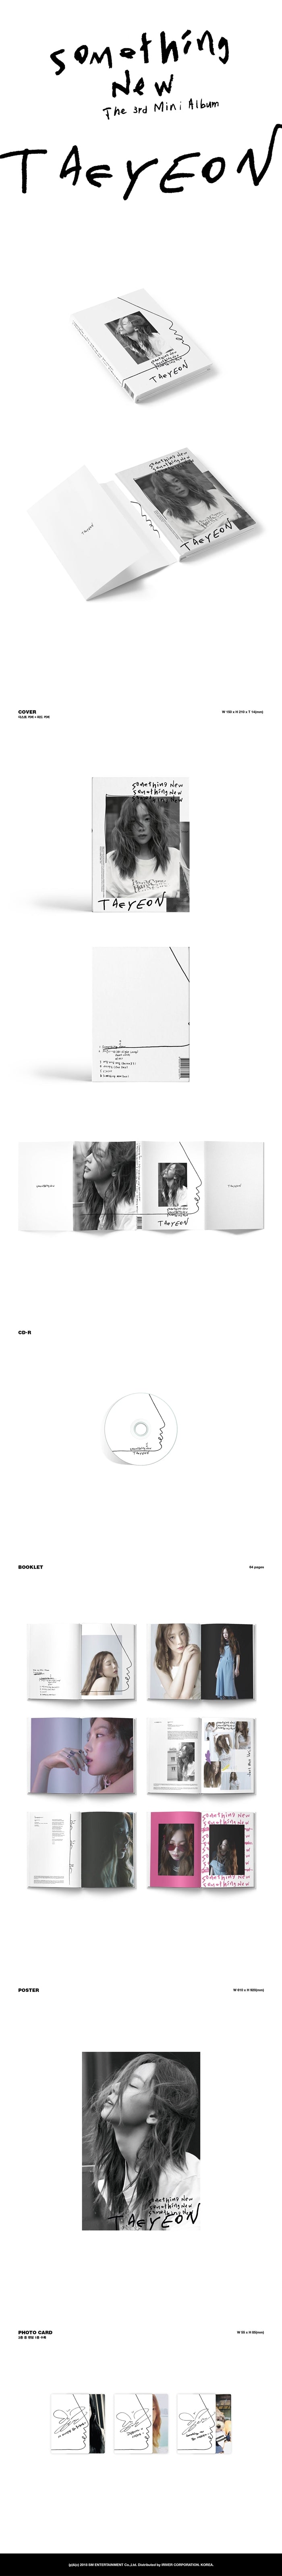 1 CD
1 Booklet
1 Photo Card (random out of 3 types)